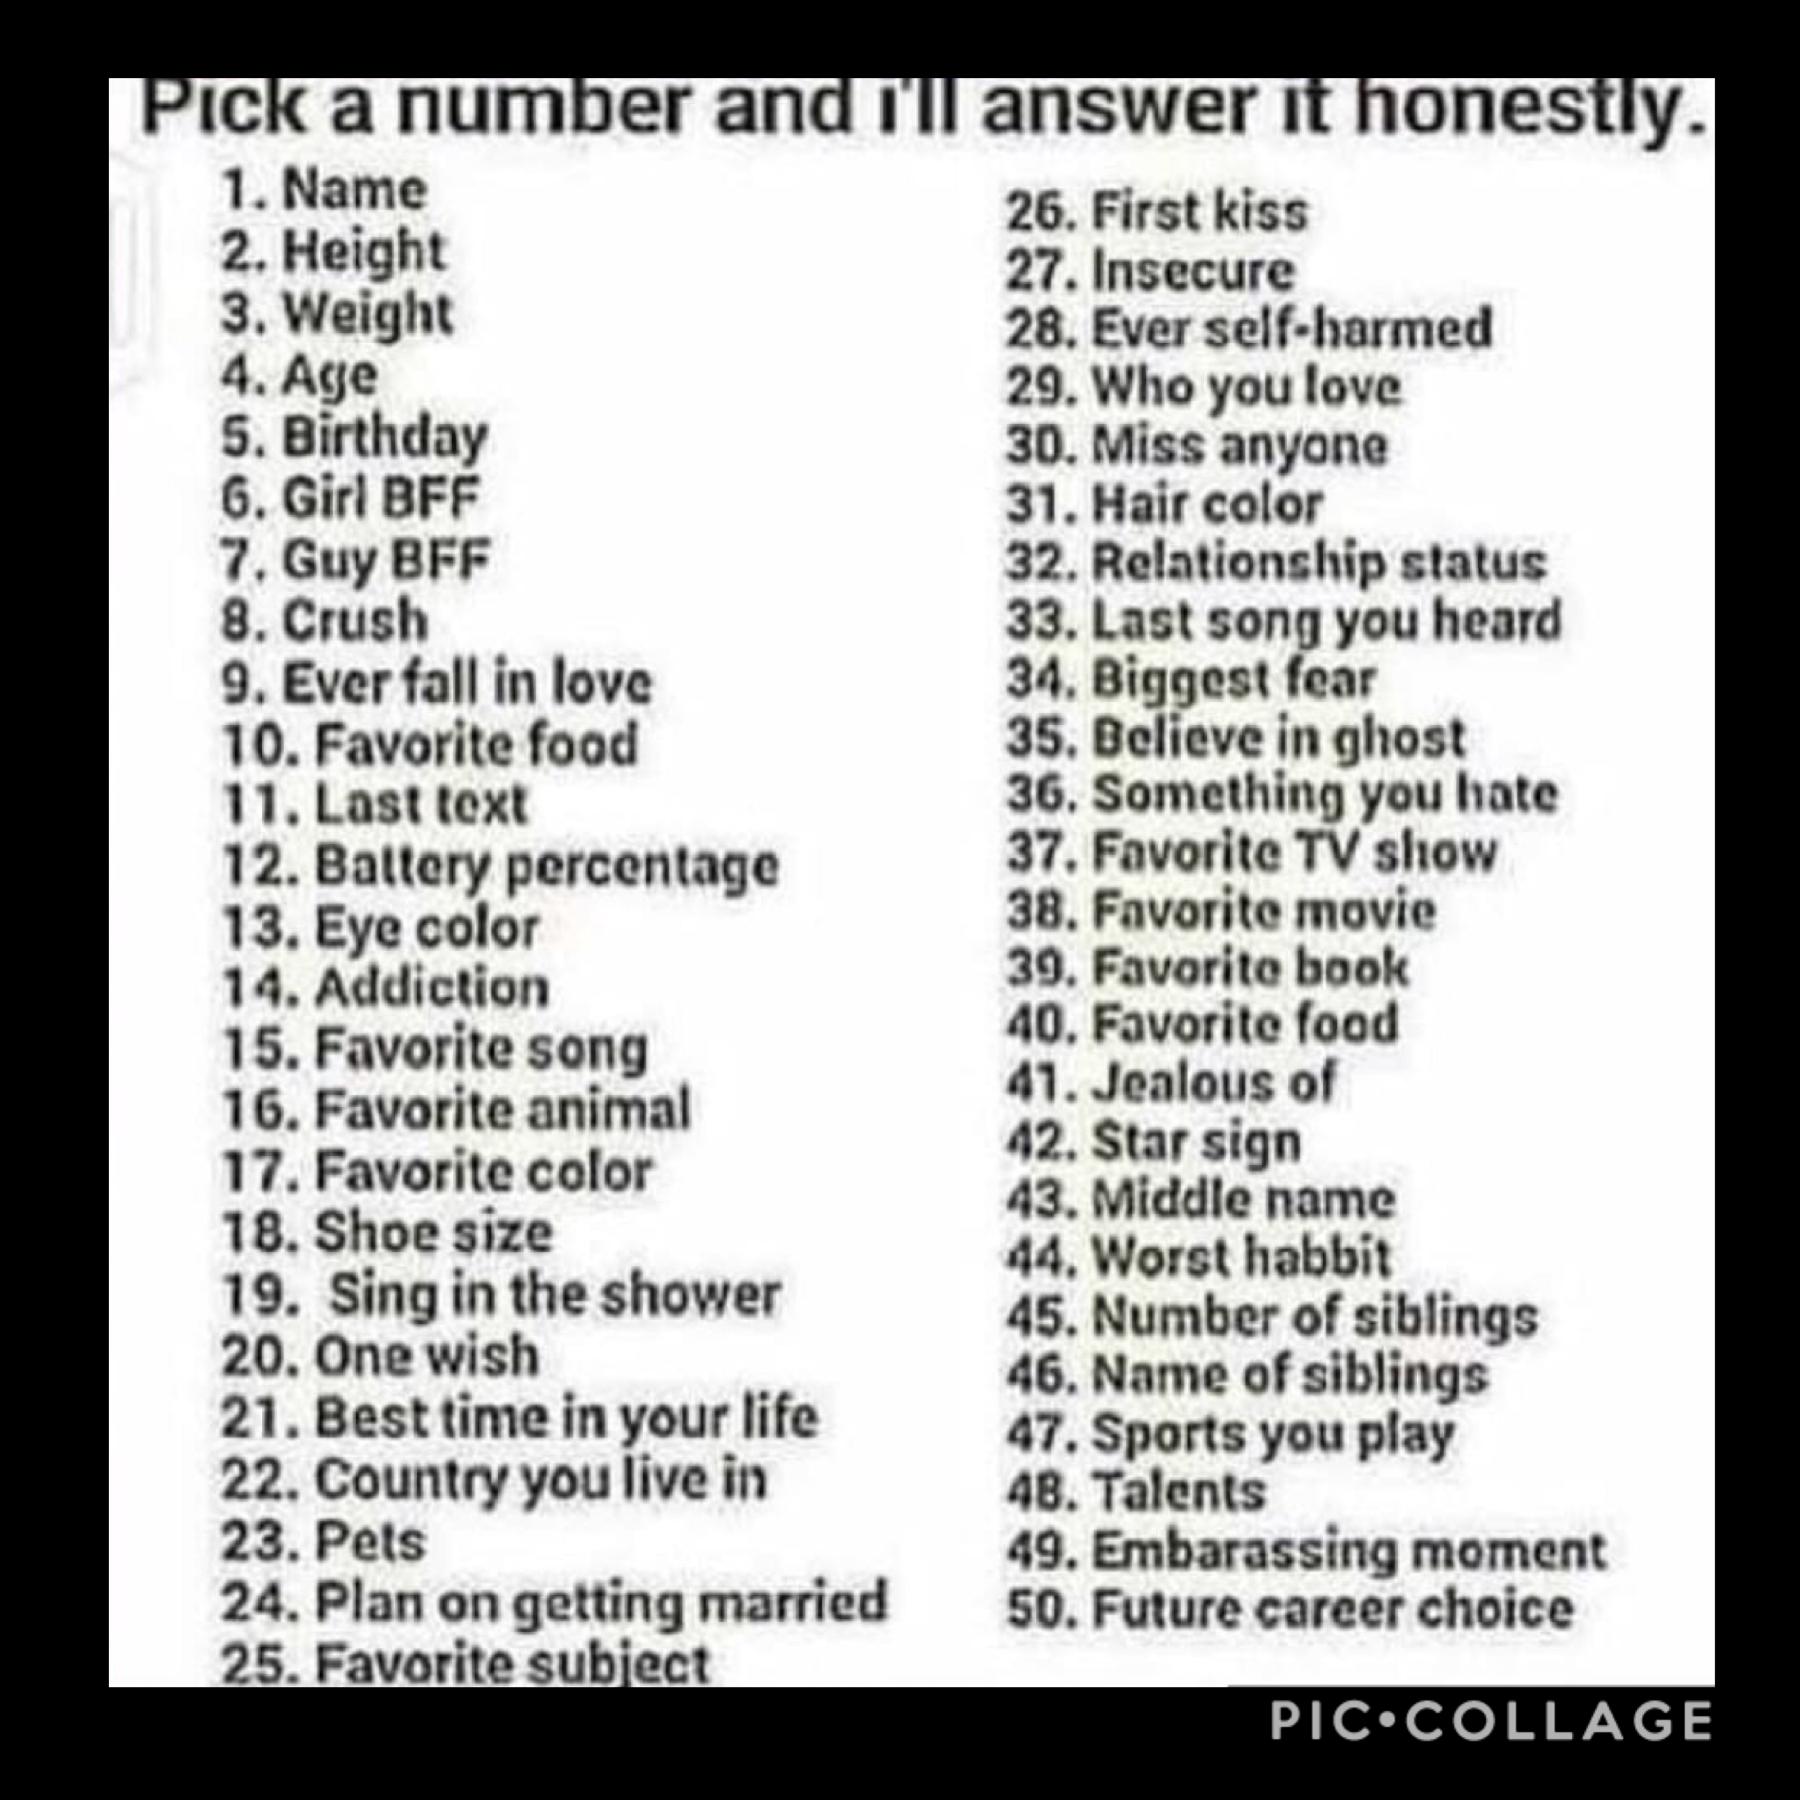 Pick a number and I will answer with honesty